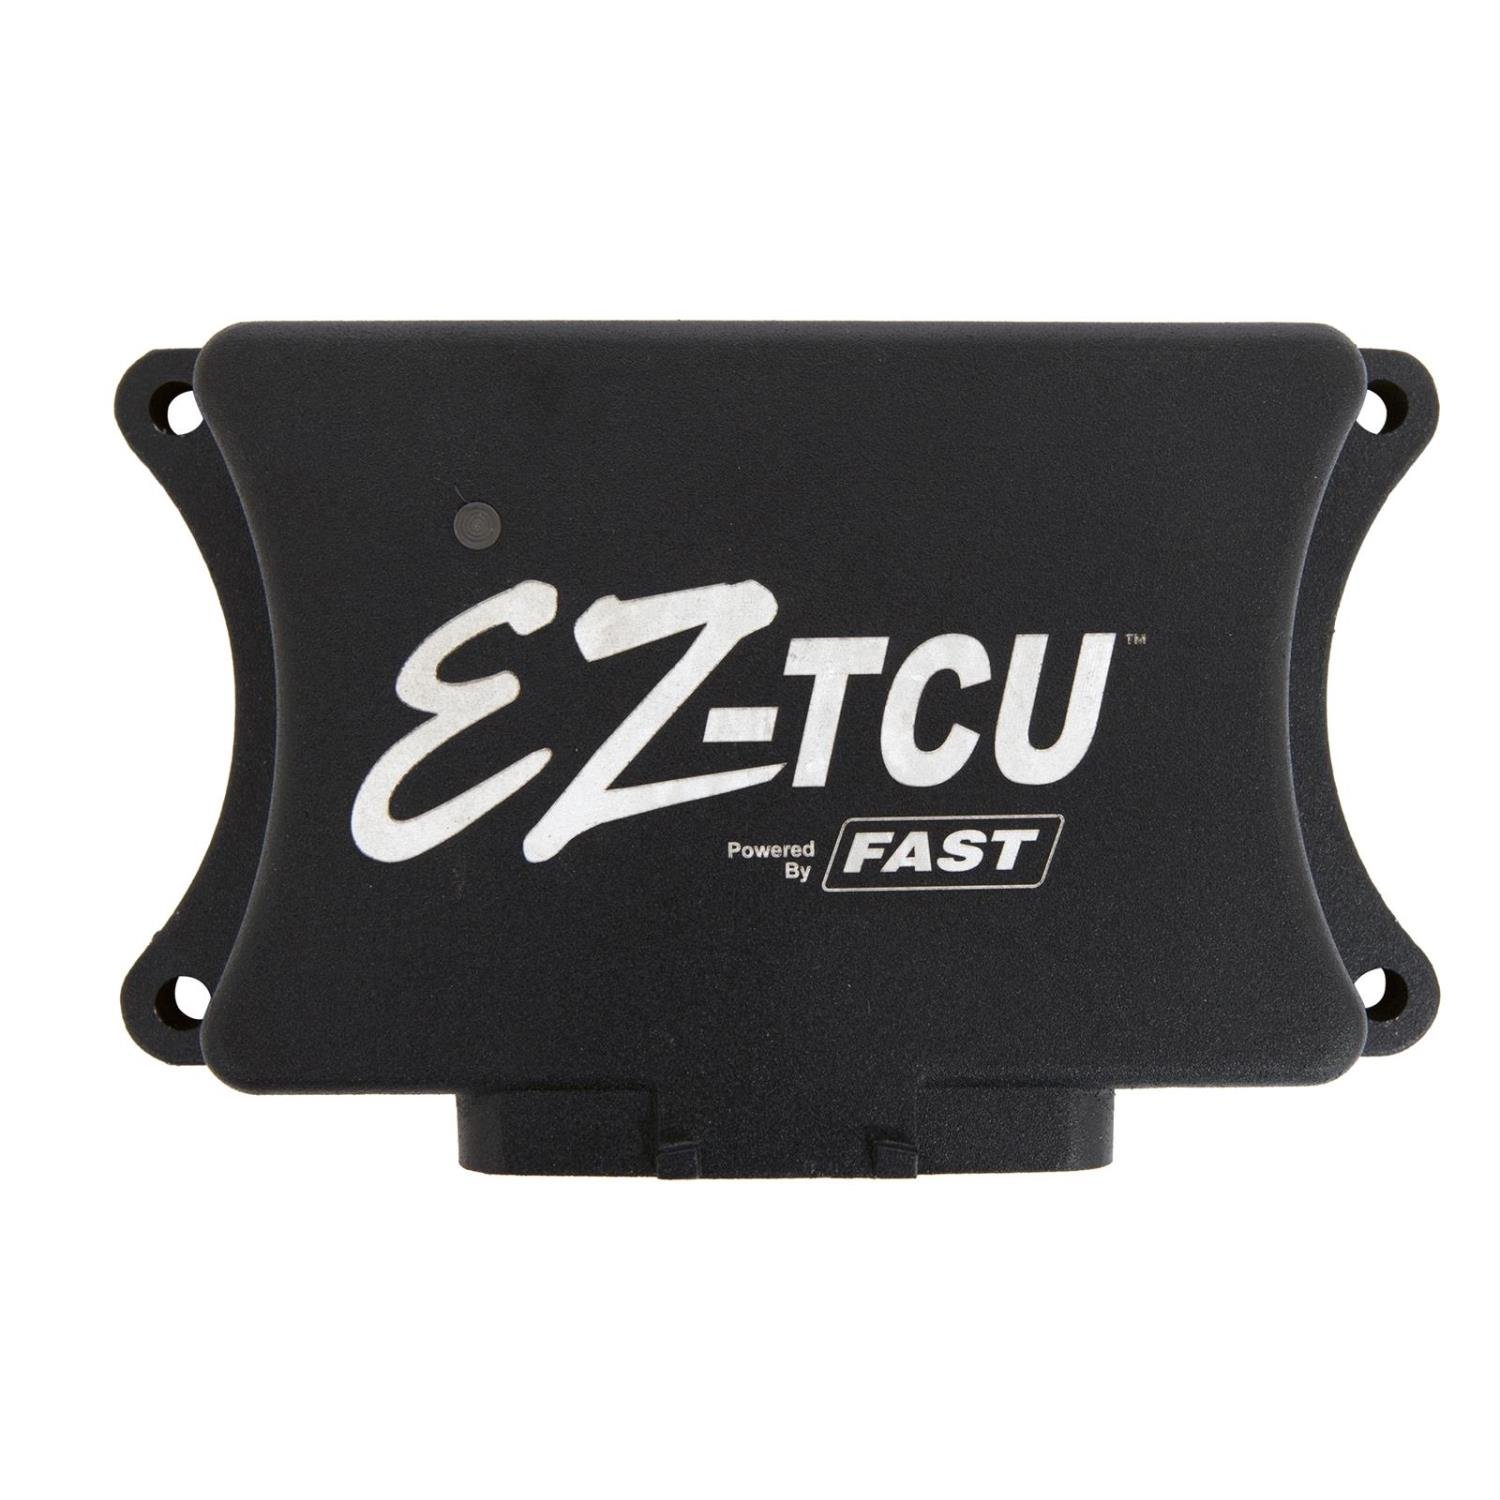 30282 EZ-TCU Computer Only For Use With 890-302820